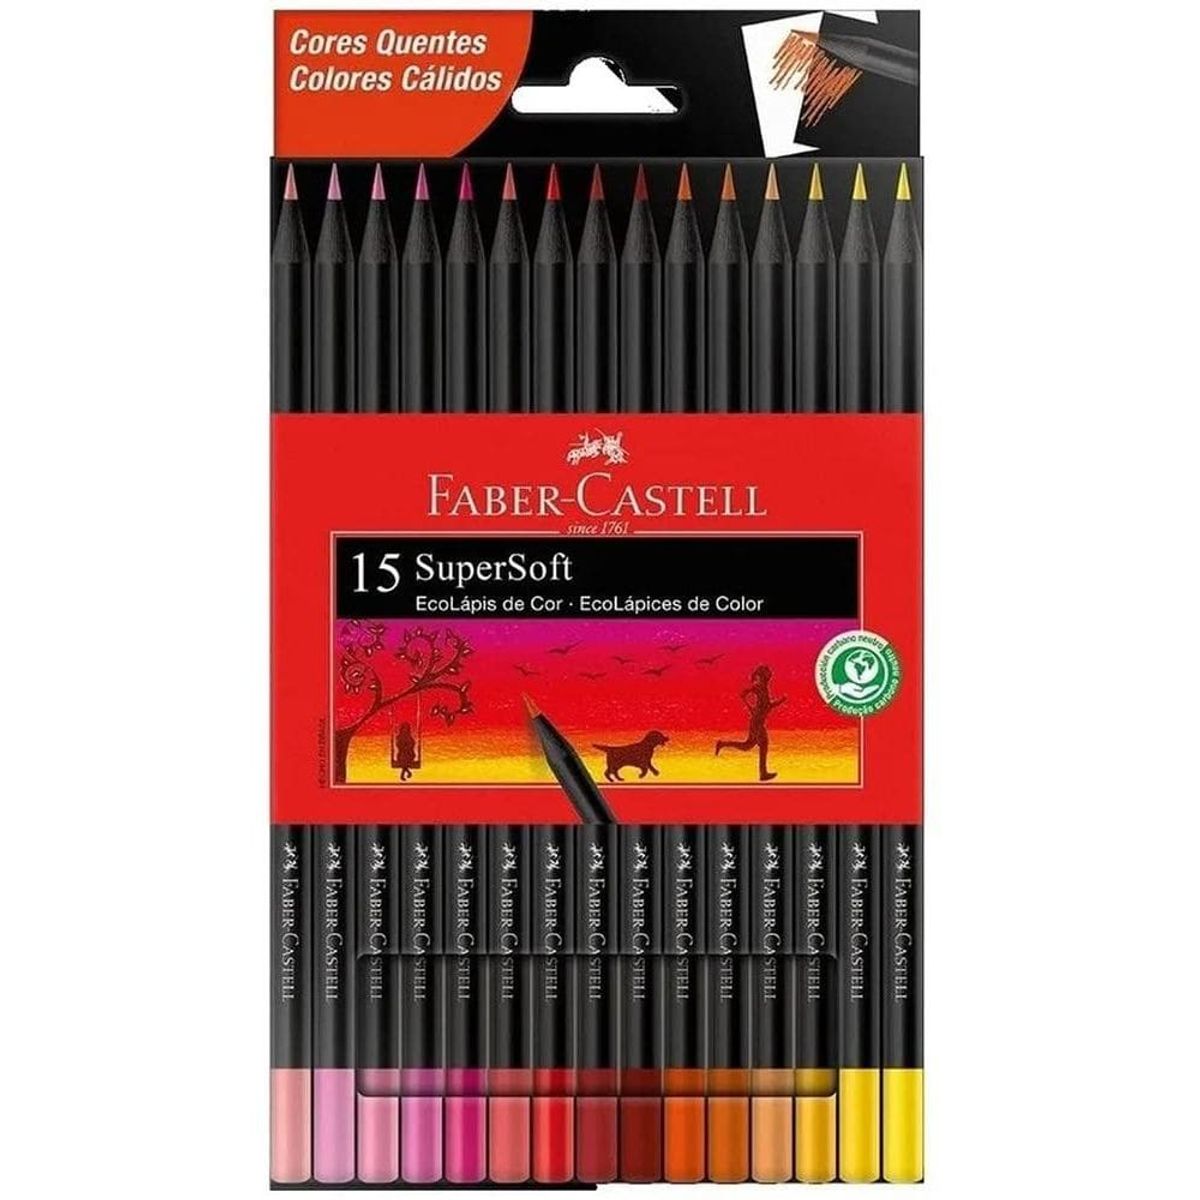 Ecolapis Faber Castell 15 Cores Quente image number 0